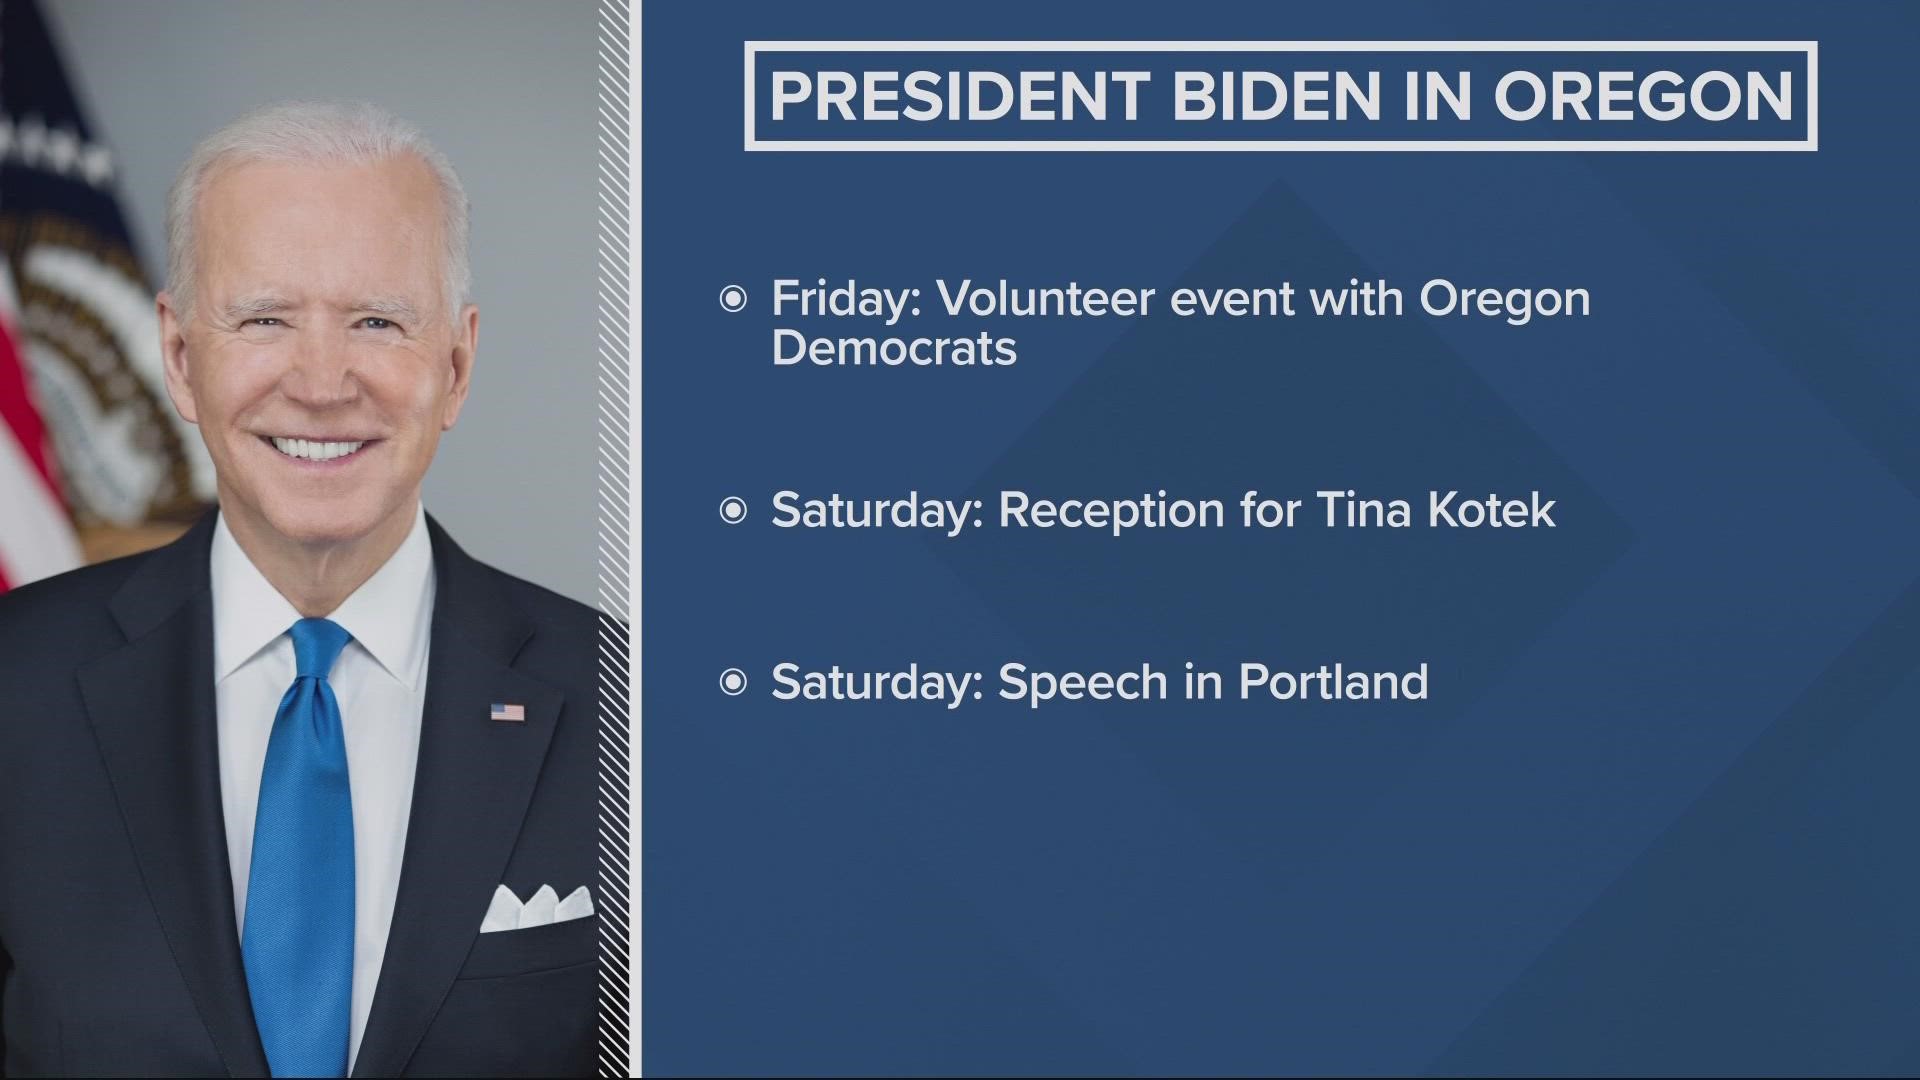 President Biden will be here this week in Oregon.